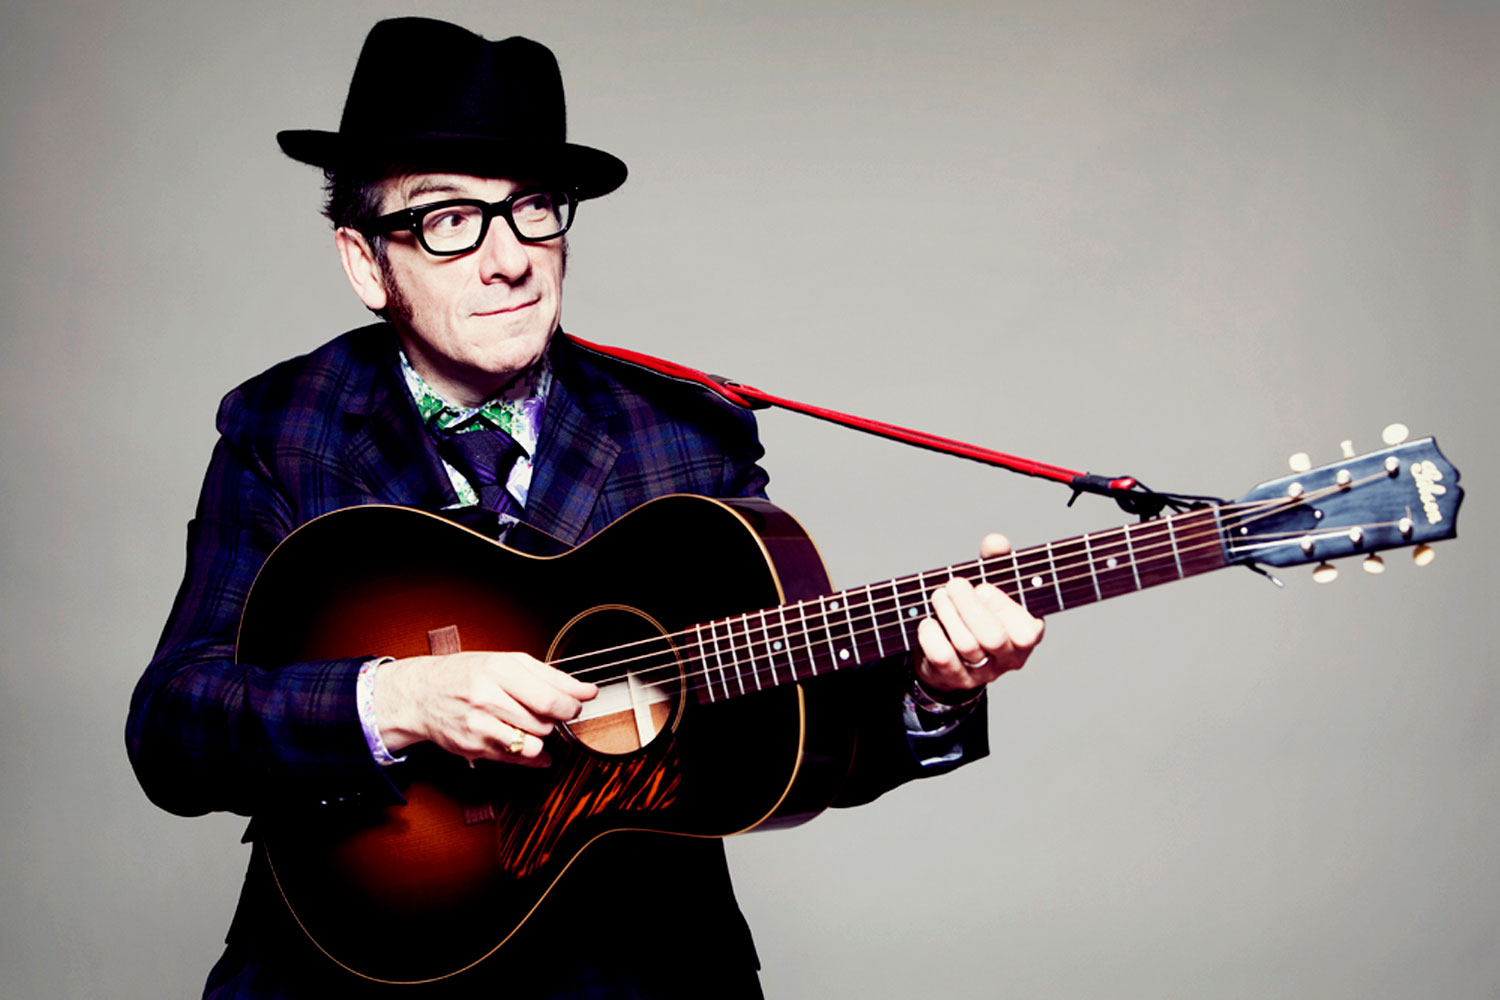 ELVIS COSTELLO TO PERFORM AT KIRBY CENTER